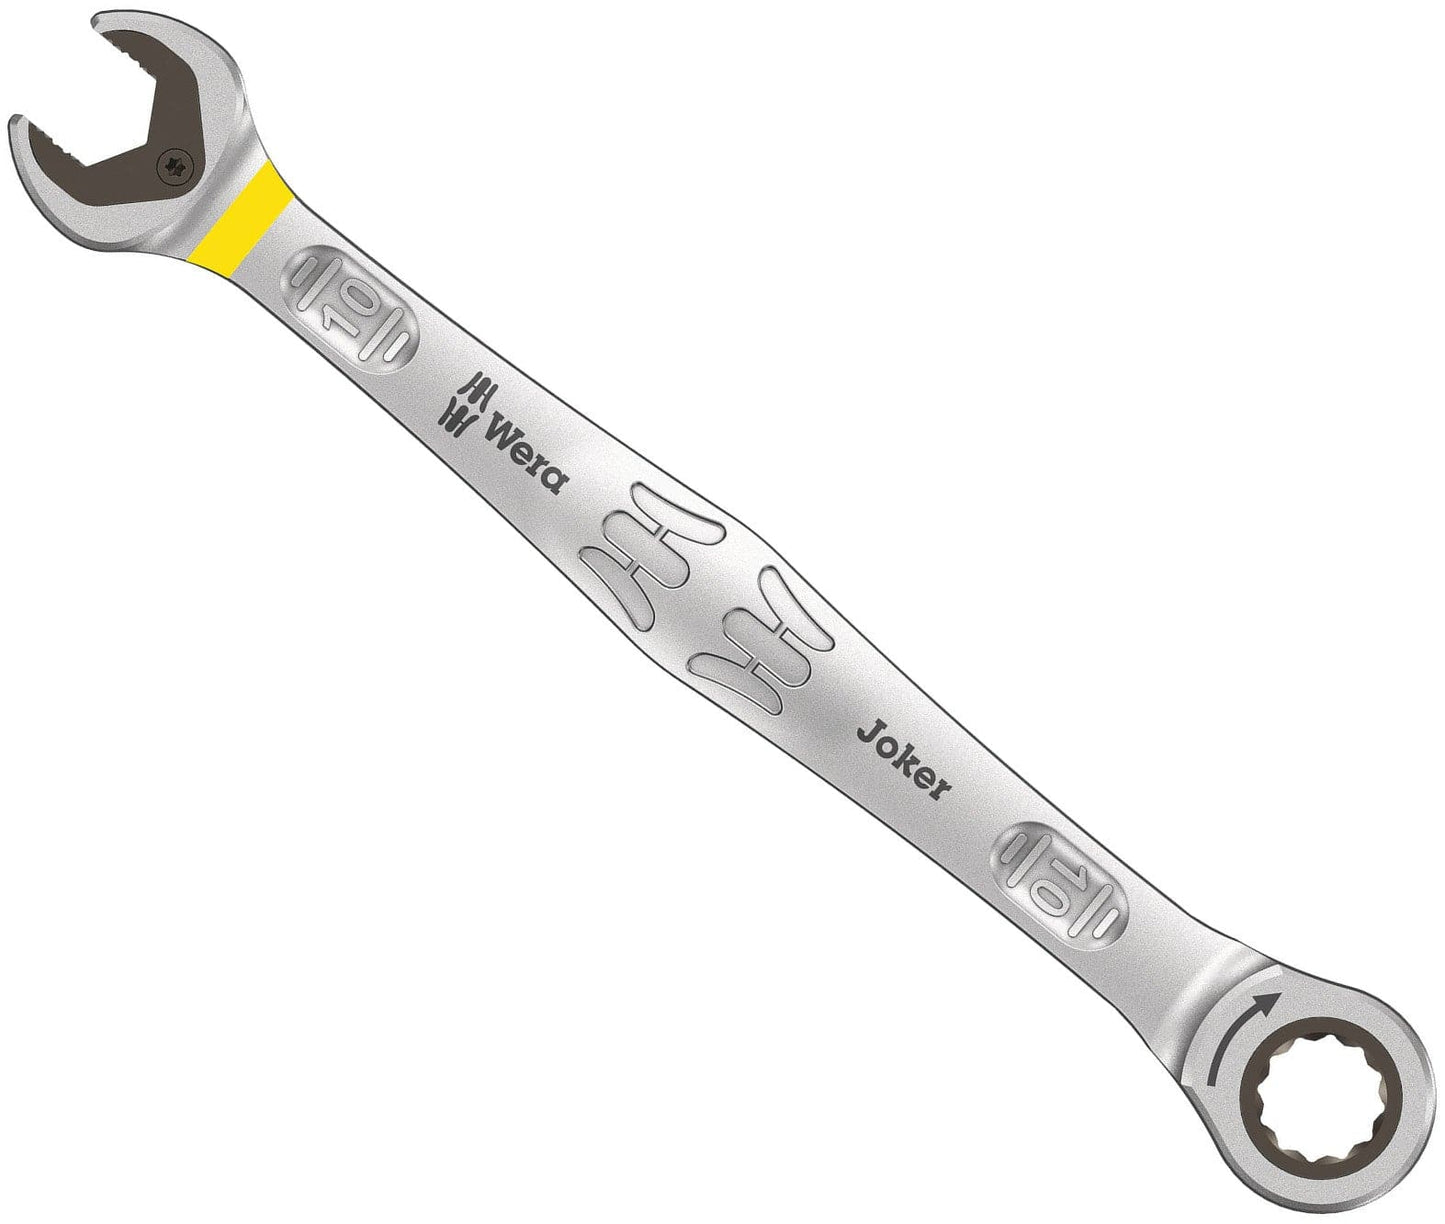 Wera Joker Ratcheting Combination Wrenches 10mm